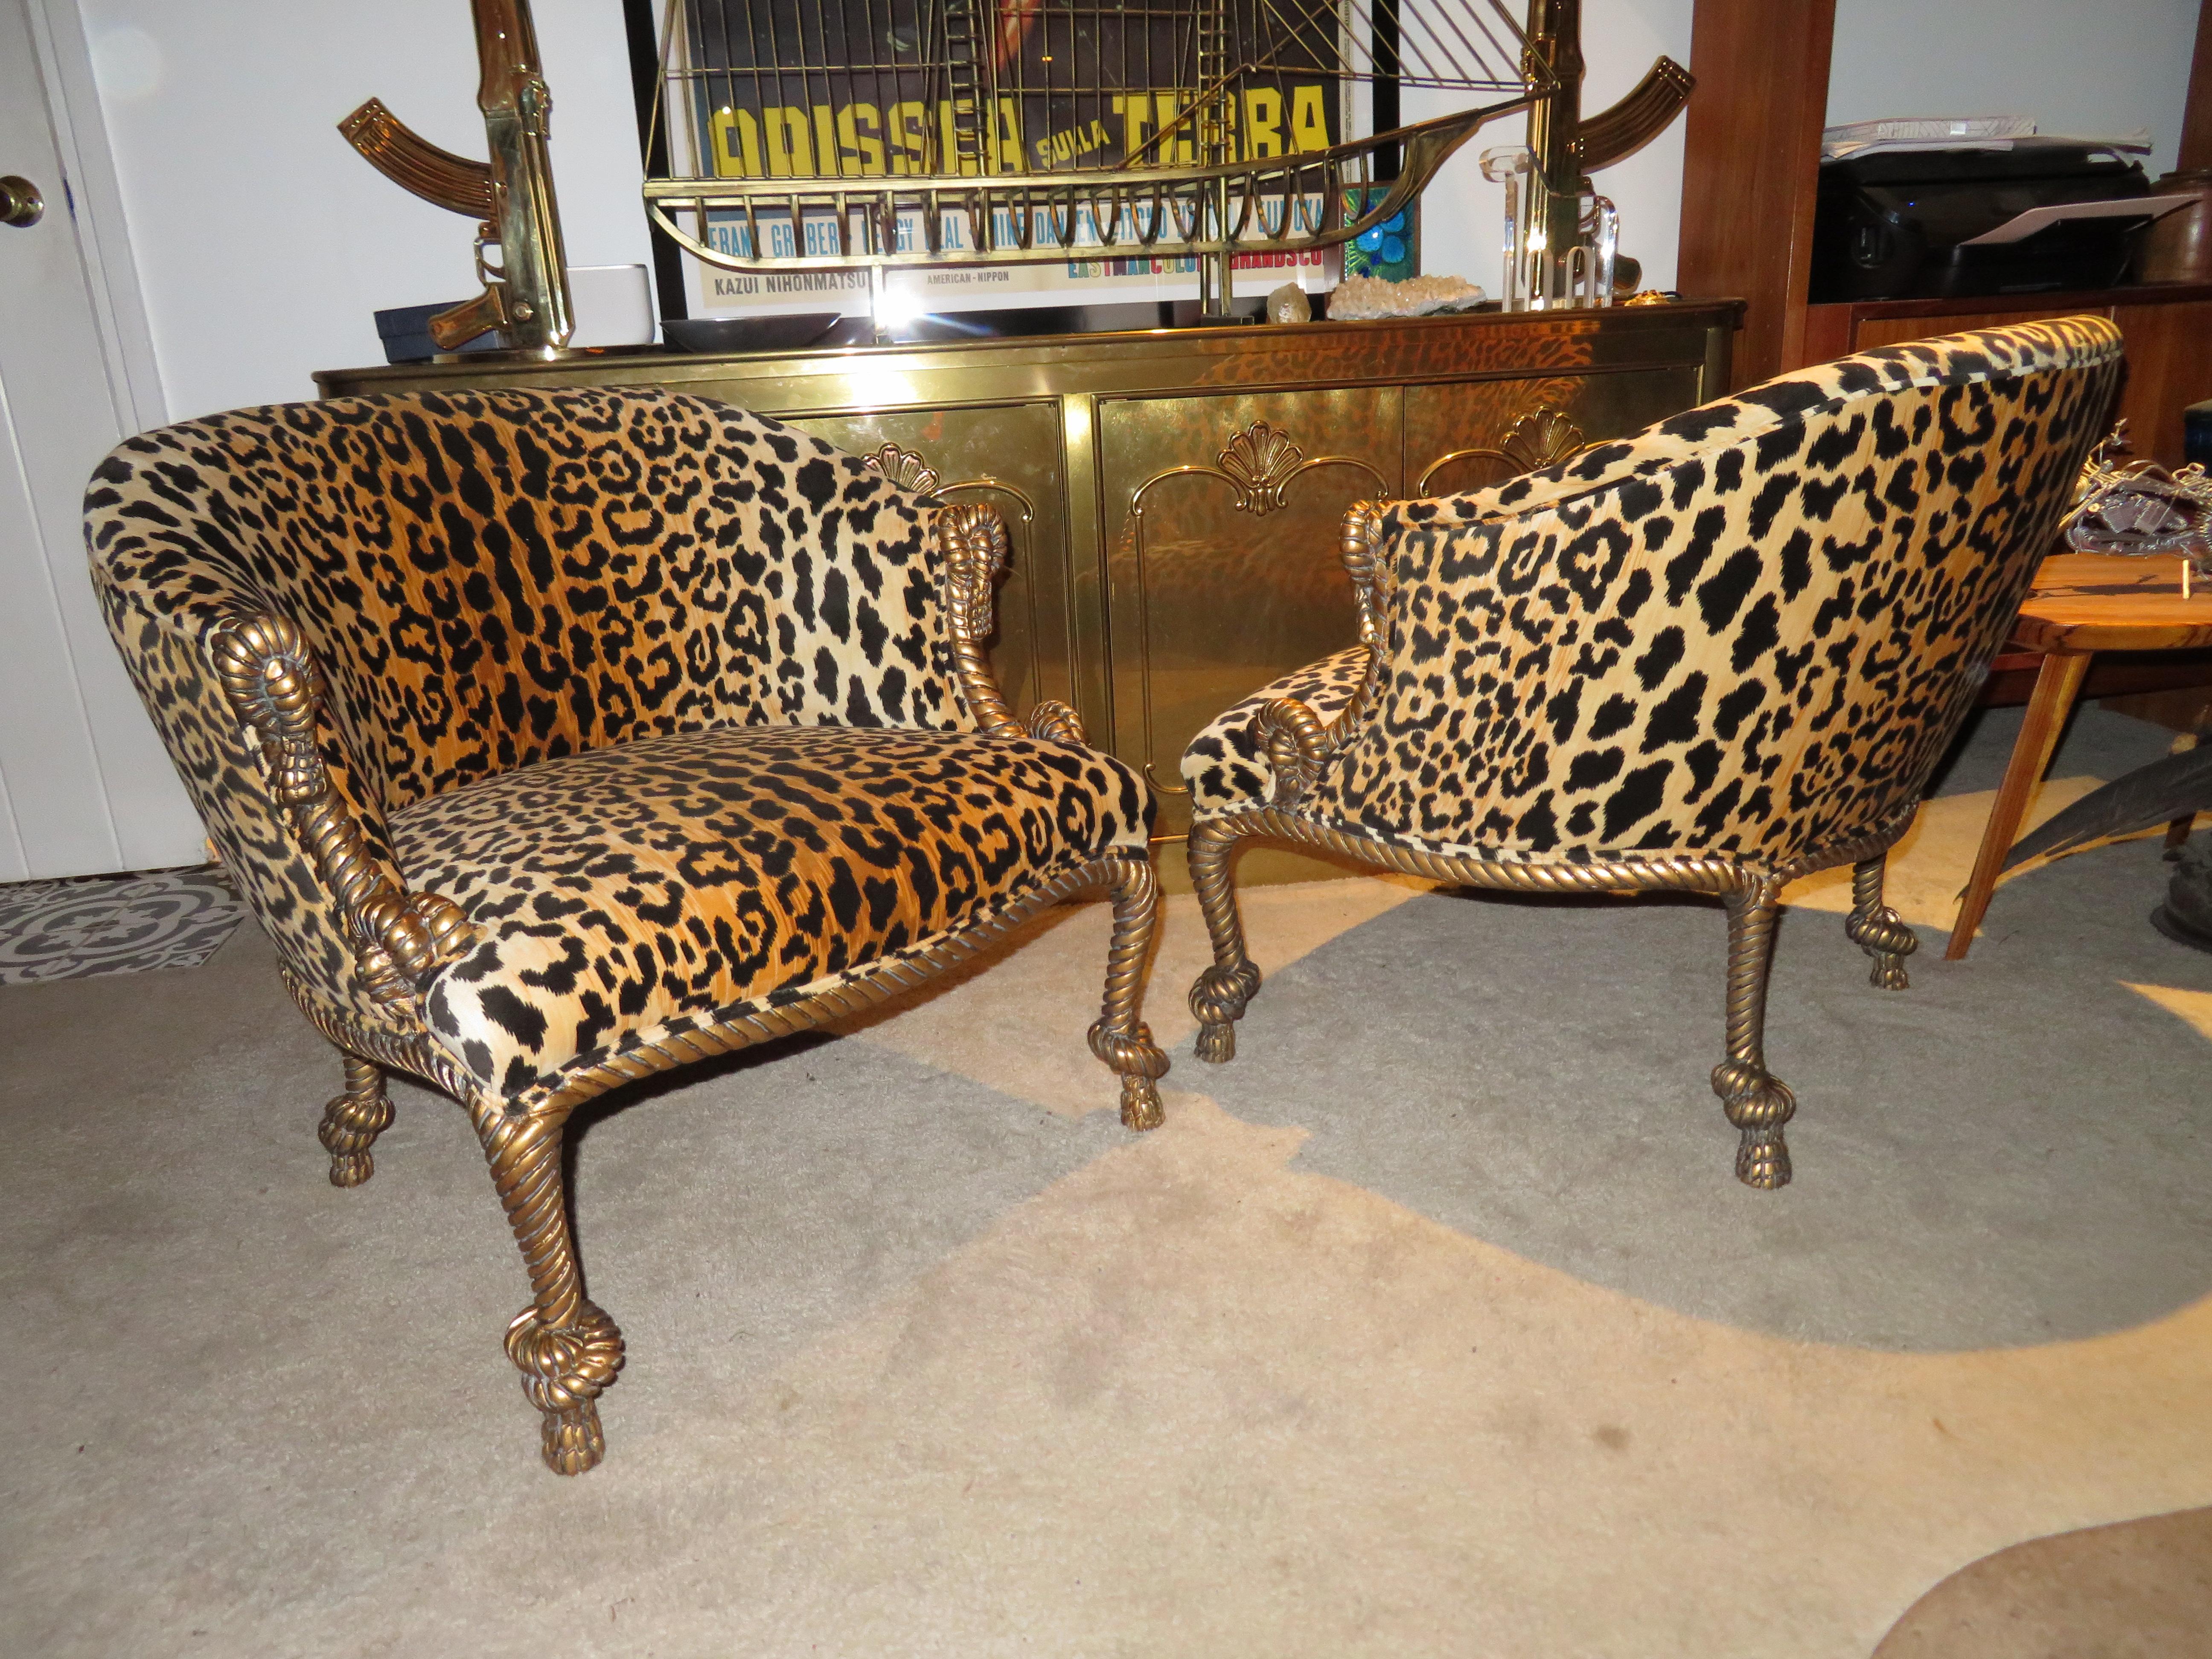 Lovely pair of 1960s Hollywood Regency barrel back armchairs with carved wood rope and tassel motif. These have been freshly re-upholstered in a gorgeous leopard velvet and are stunning in person. Chair size: 28.5 in. H x 26.5 in. W x 27.5 in. D.